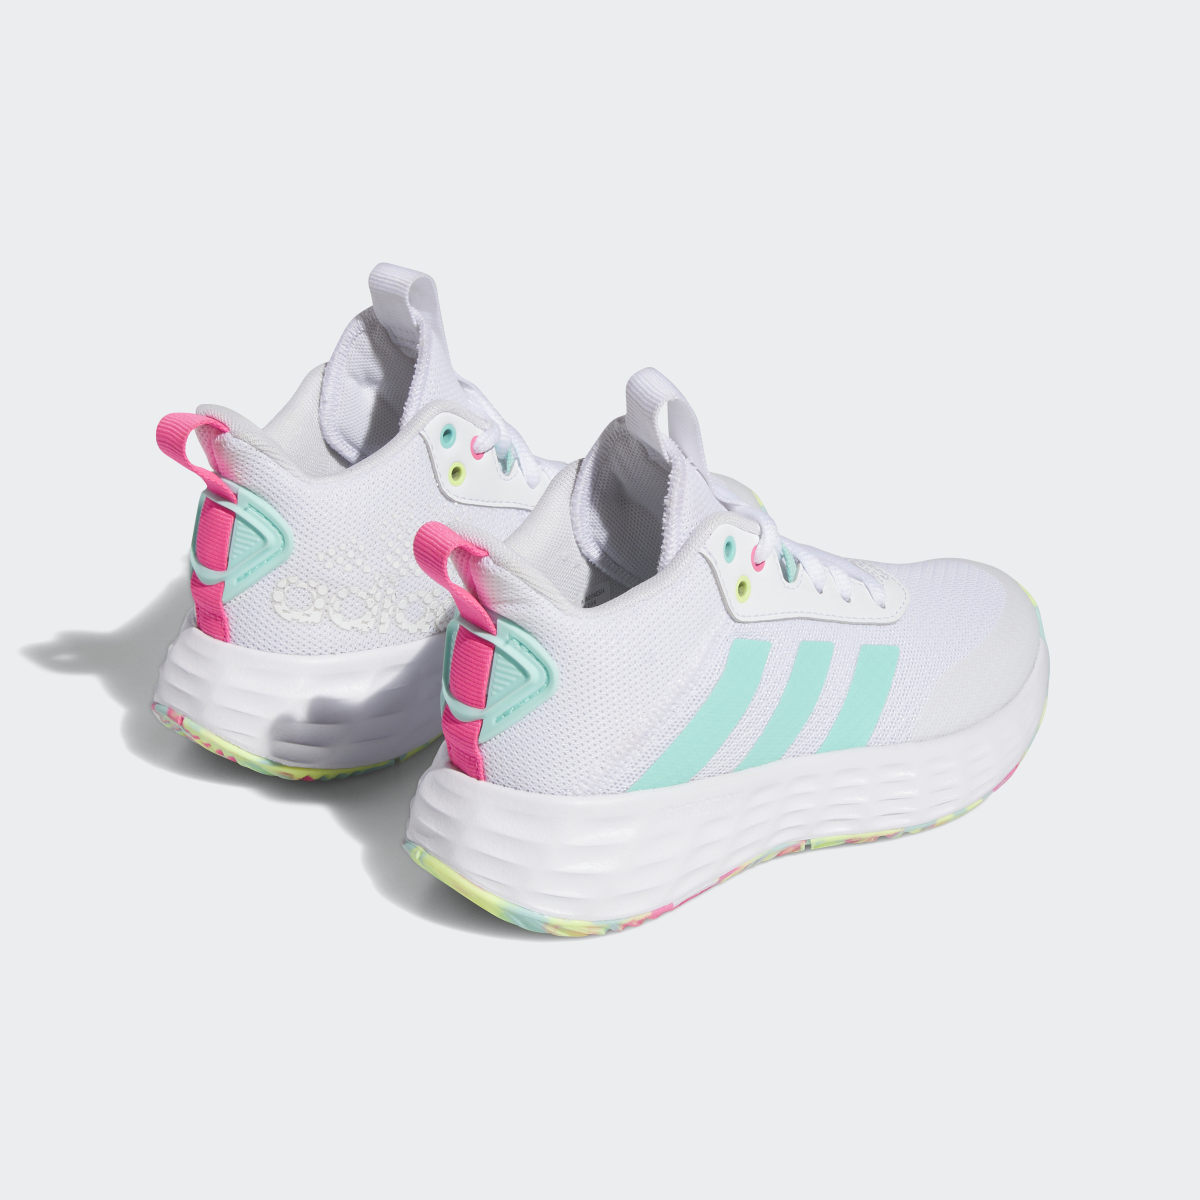 Adidas Ownthegame 2.0 Shoes. 6